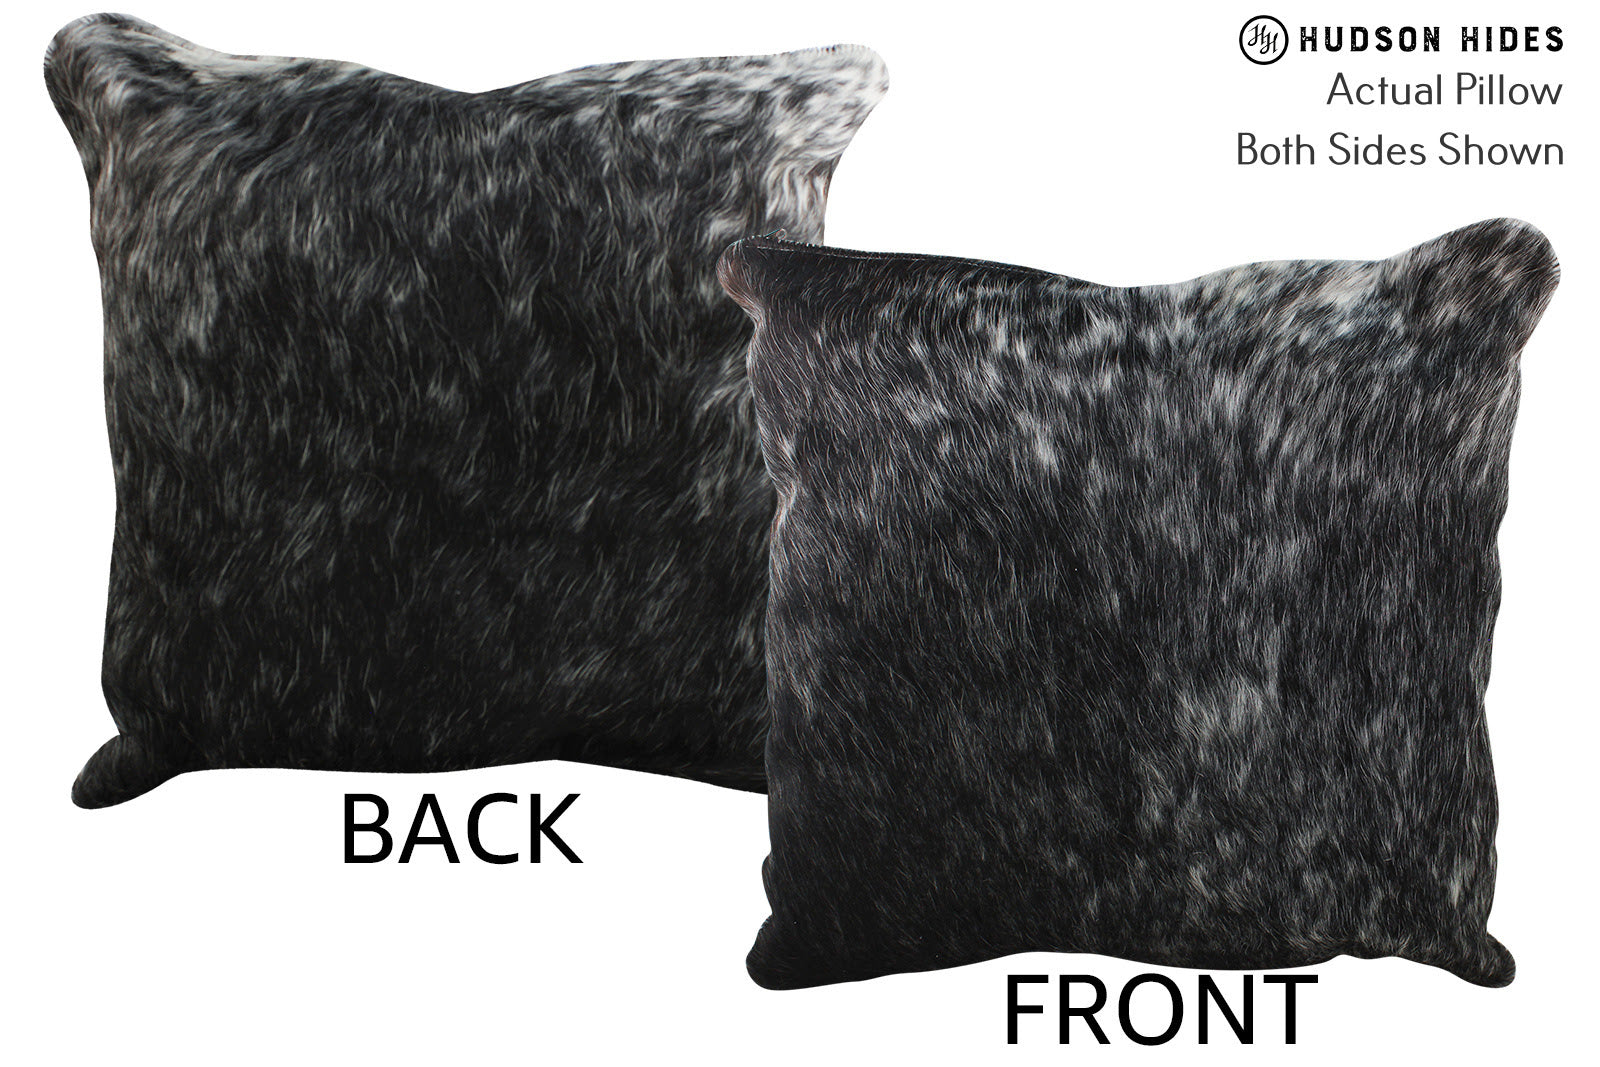 Black and White Cowhide Pillow #76126